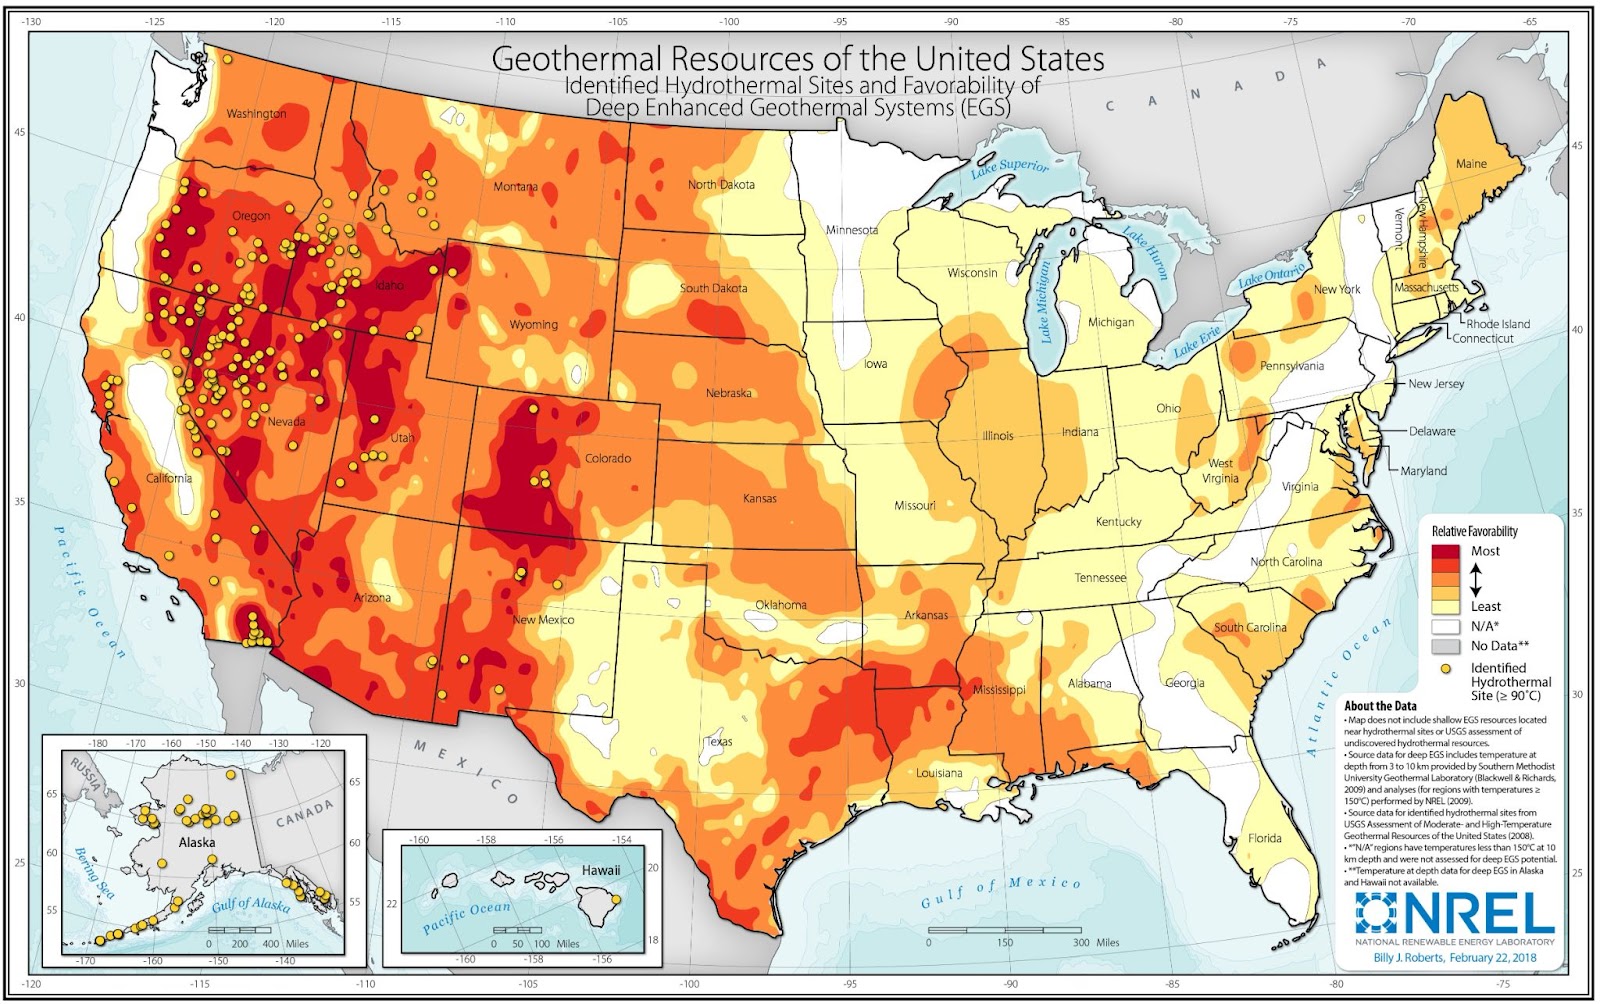 Map showing geothermal resources in the US